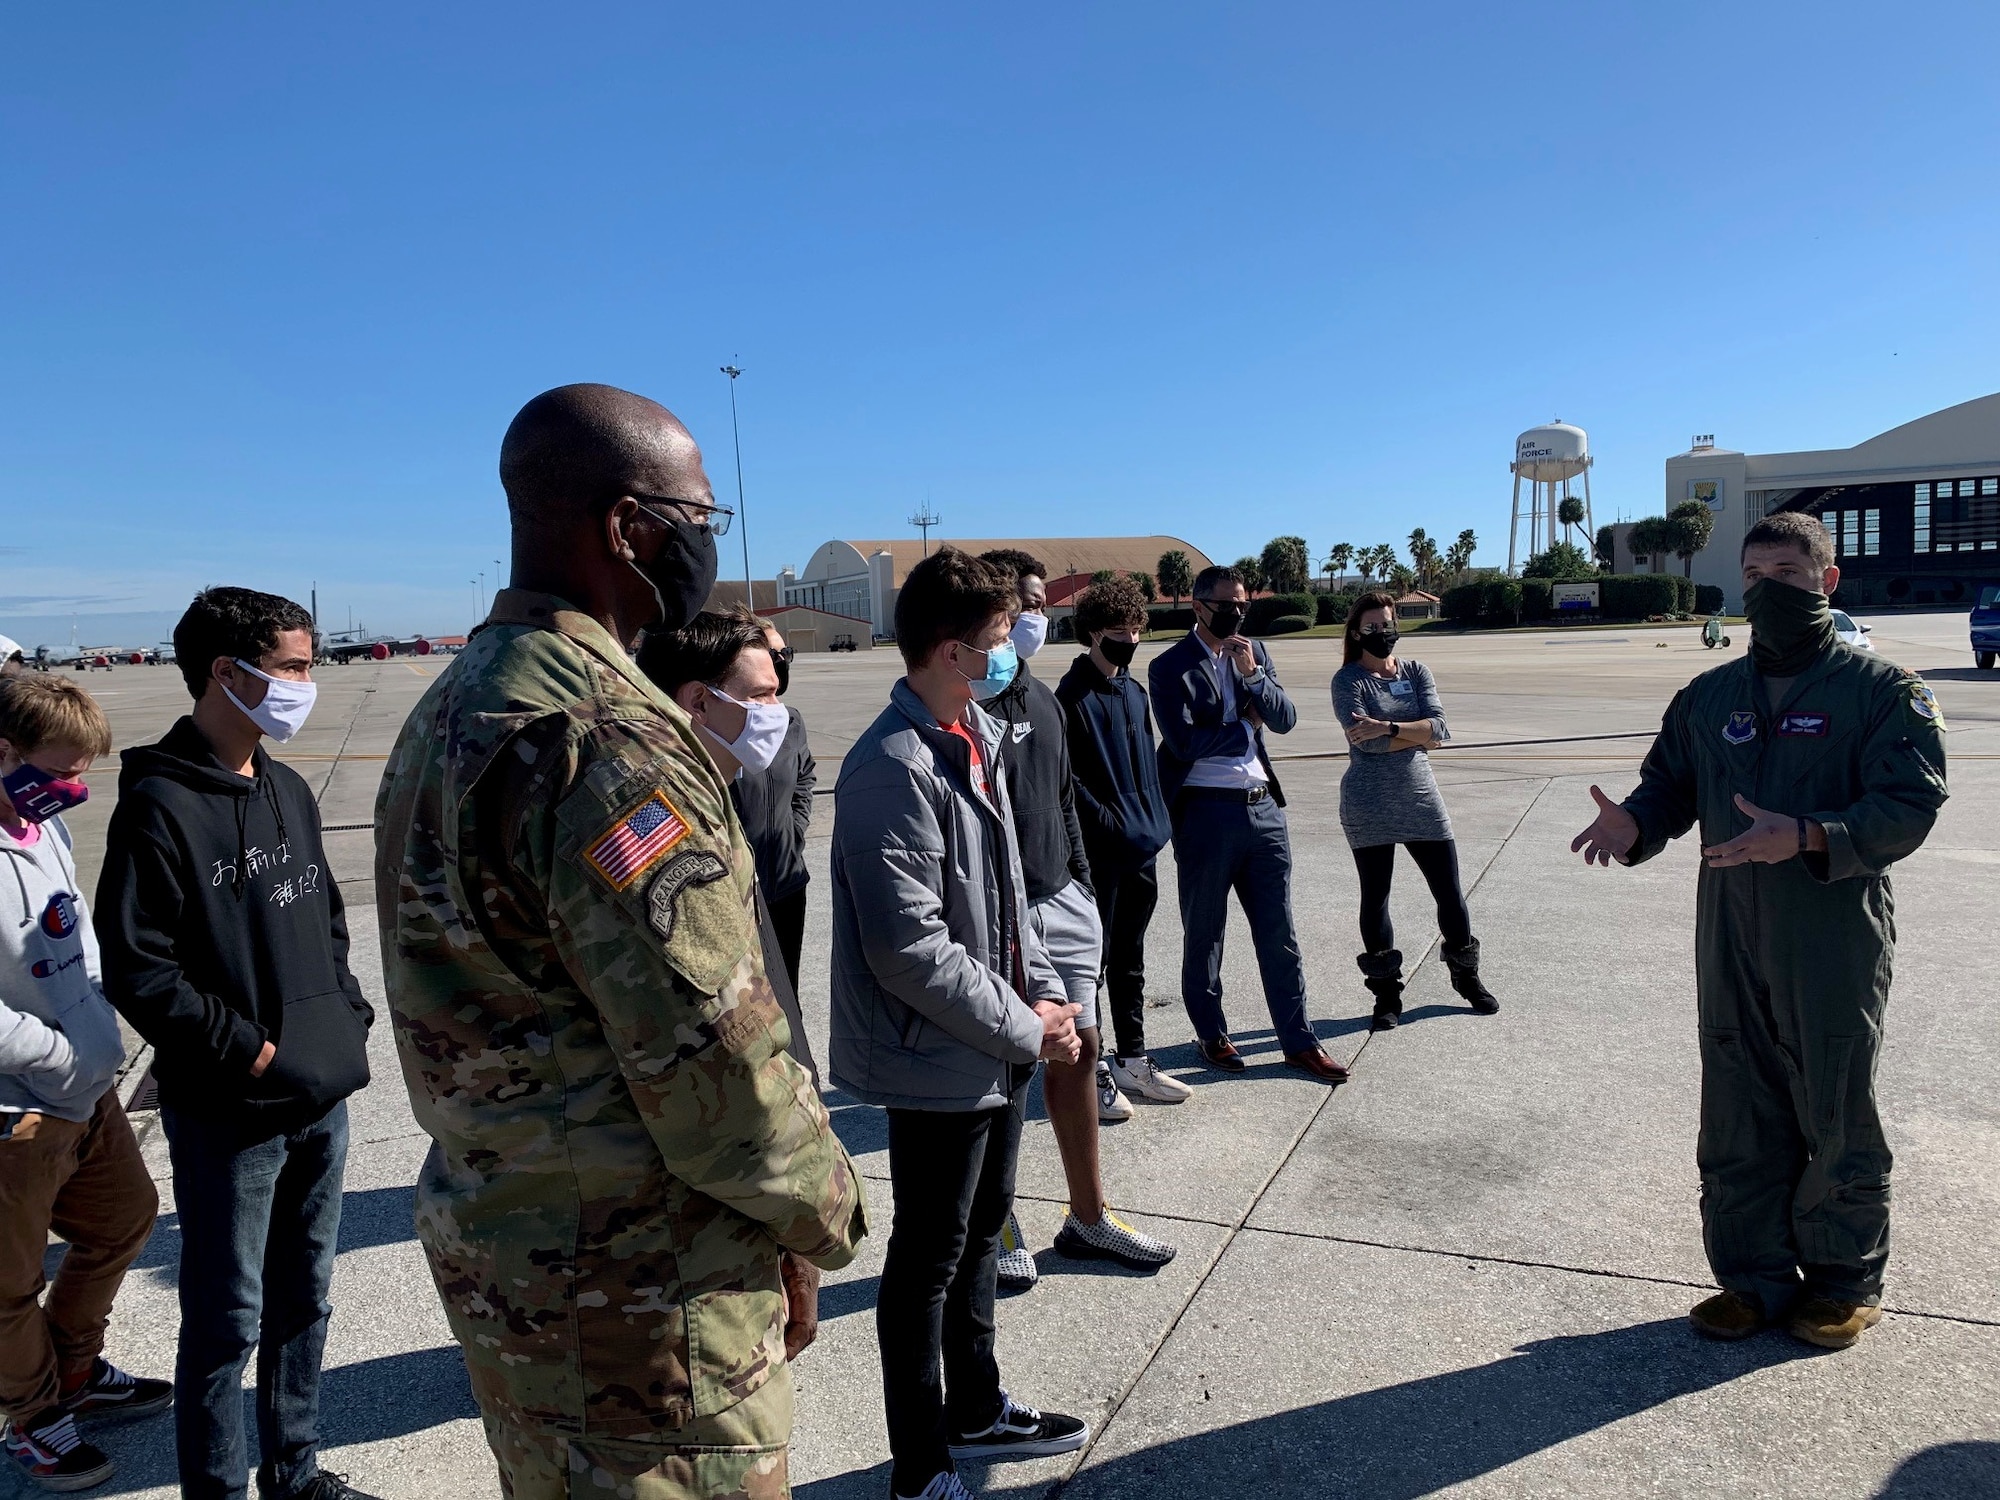 Air Force Maj. Patrick Burke, right, a B-1B Lancer bomber pilot from the 7th Bomb Wing, Dyess AFB, Texas, briefs Tampa Bay students on the MacDill Air Force Base, Florida flight line during a tour of a B-1B Lancer bomber and KC-135 Stratotanker aircraft Feb. 5, 2021. The students visited MacDill AFB to learn about the Air Force aircraft scheduled to fly over Raymond James Stadium during Super Bowl LV. The tour provided both male and female students from diverse multi-ethnic backgrounds in the community the opportunity to learn about the Air Force mission while sitting in the aircraft’s cockpit and visualizing themselves soaring at 35,000 feet in the air. (U.S. Air Force photo by Terry Montrose)